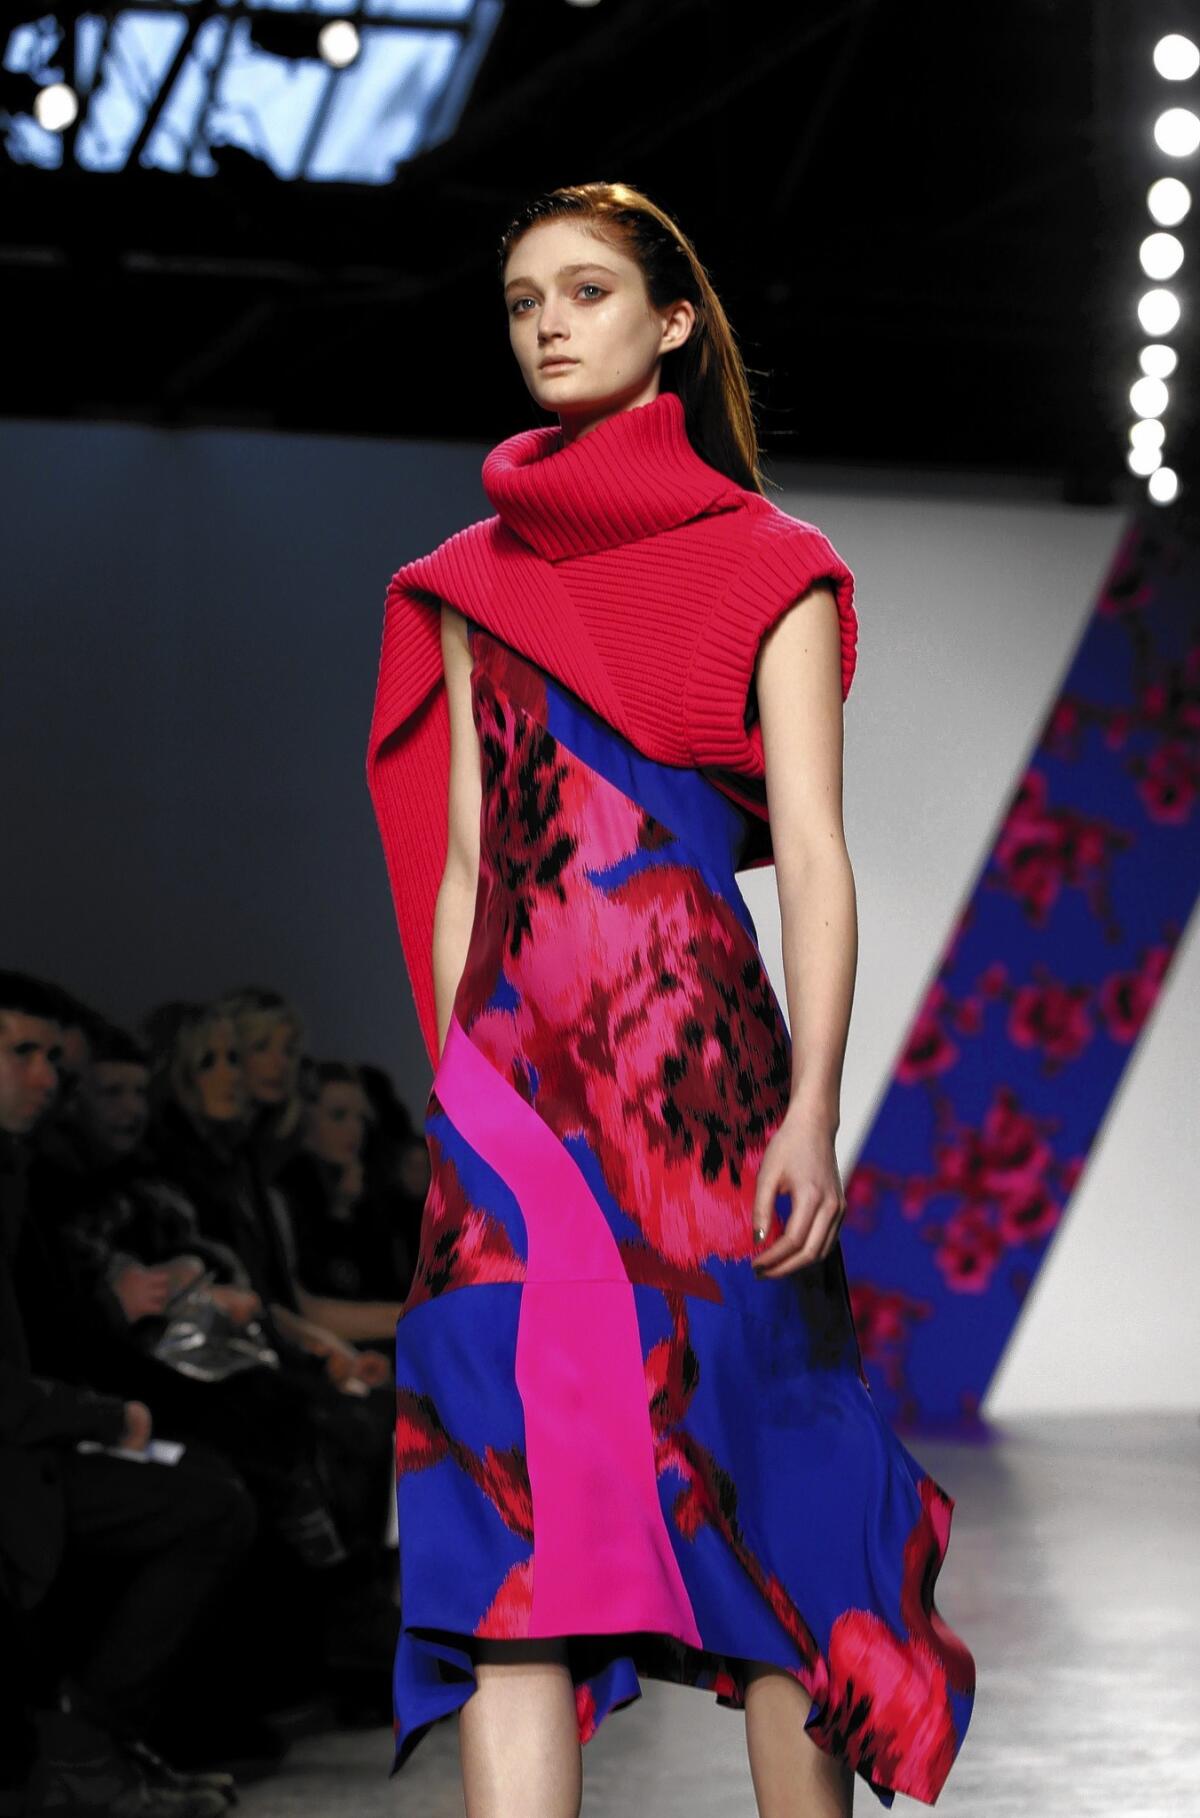 A model walks the runway during the presentation of the Fall 2014 Thakoon show during New York Fashion Week.